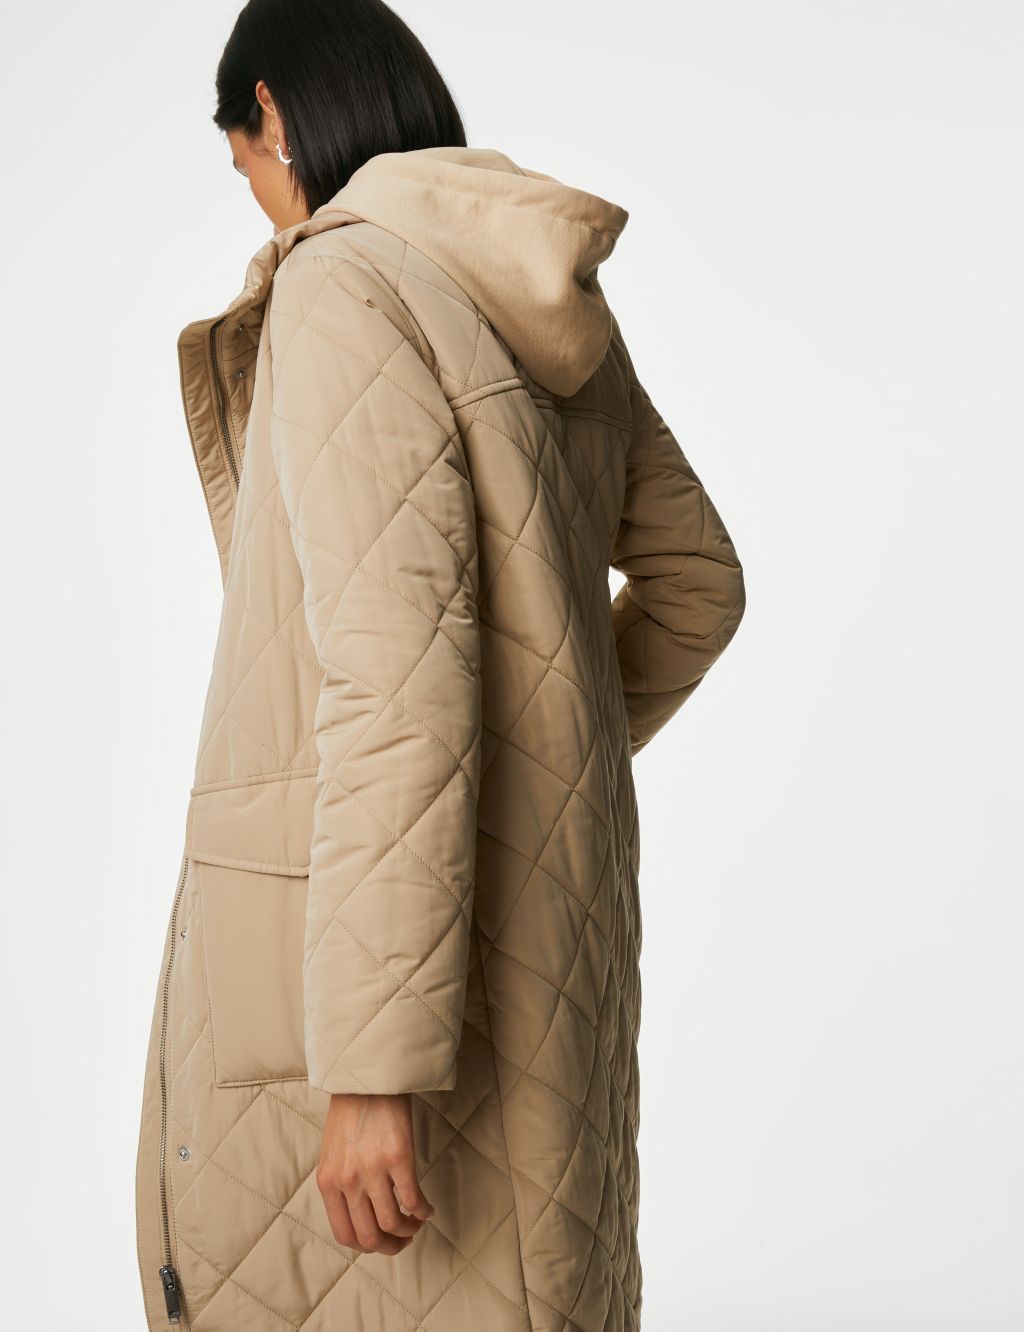 Diamond Quilted Funnel Neck Longline Coat image 5